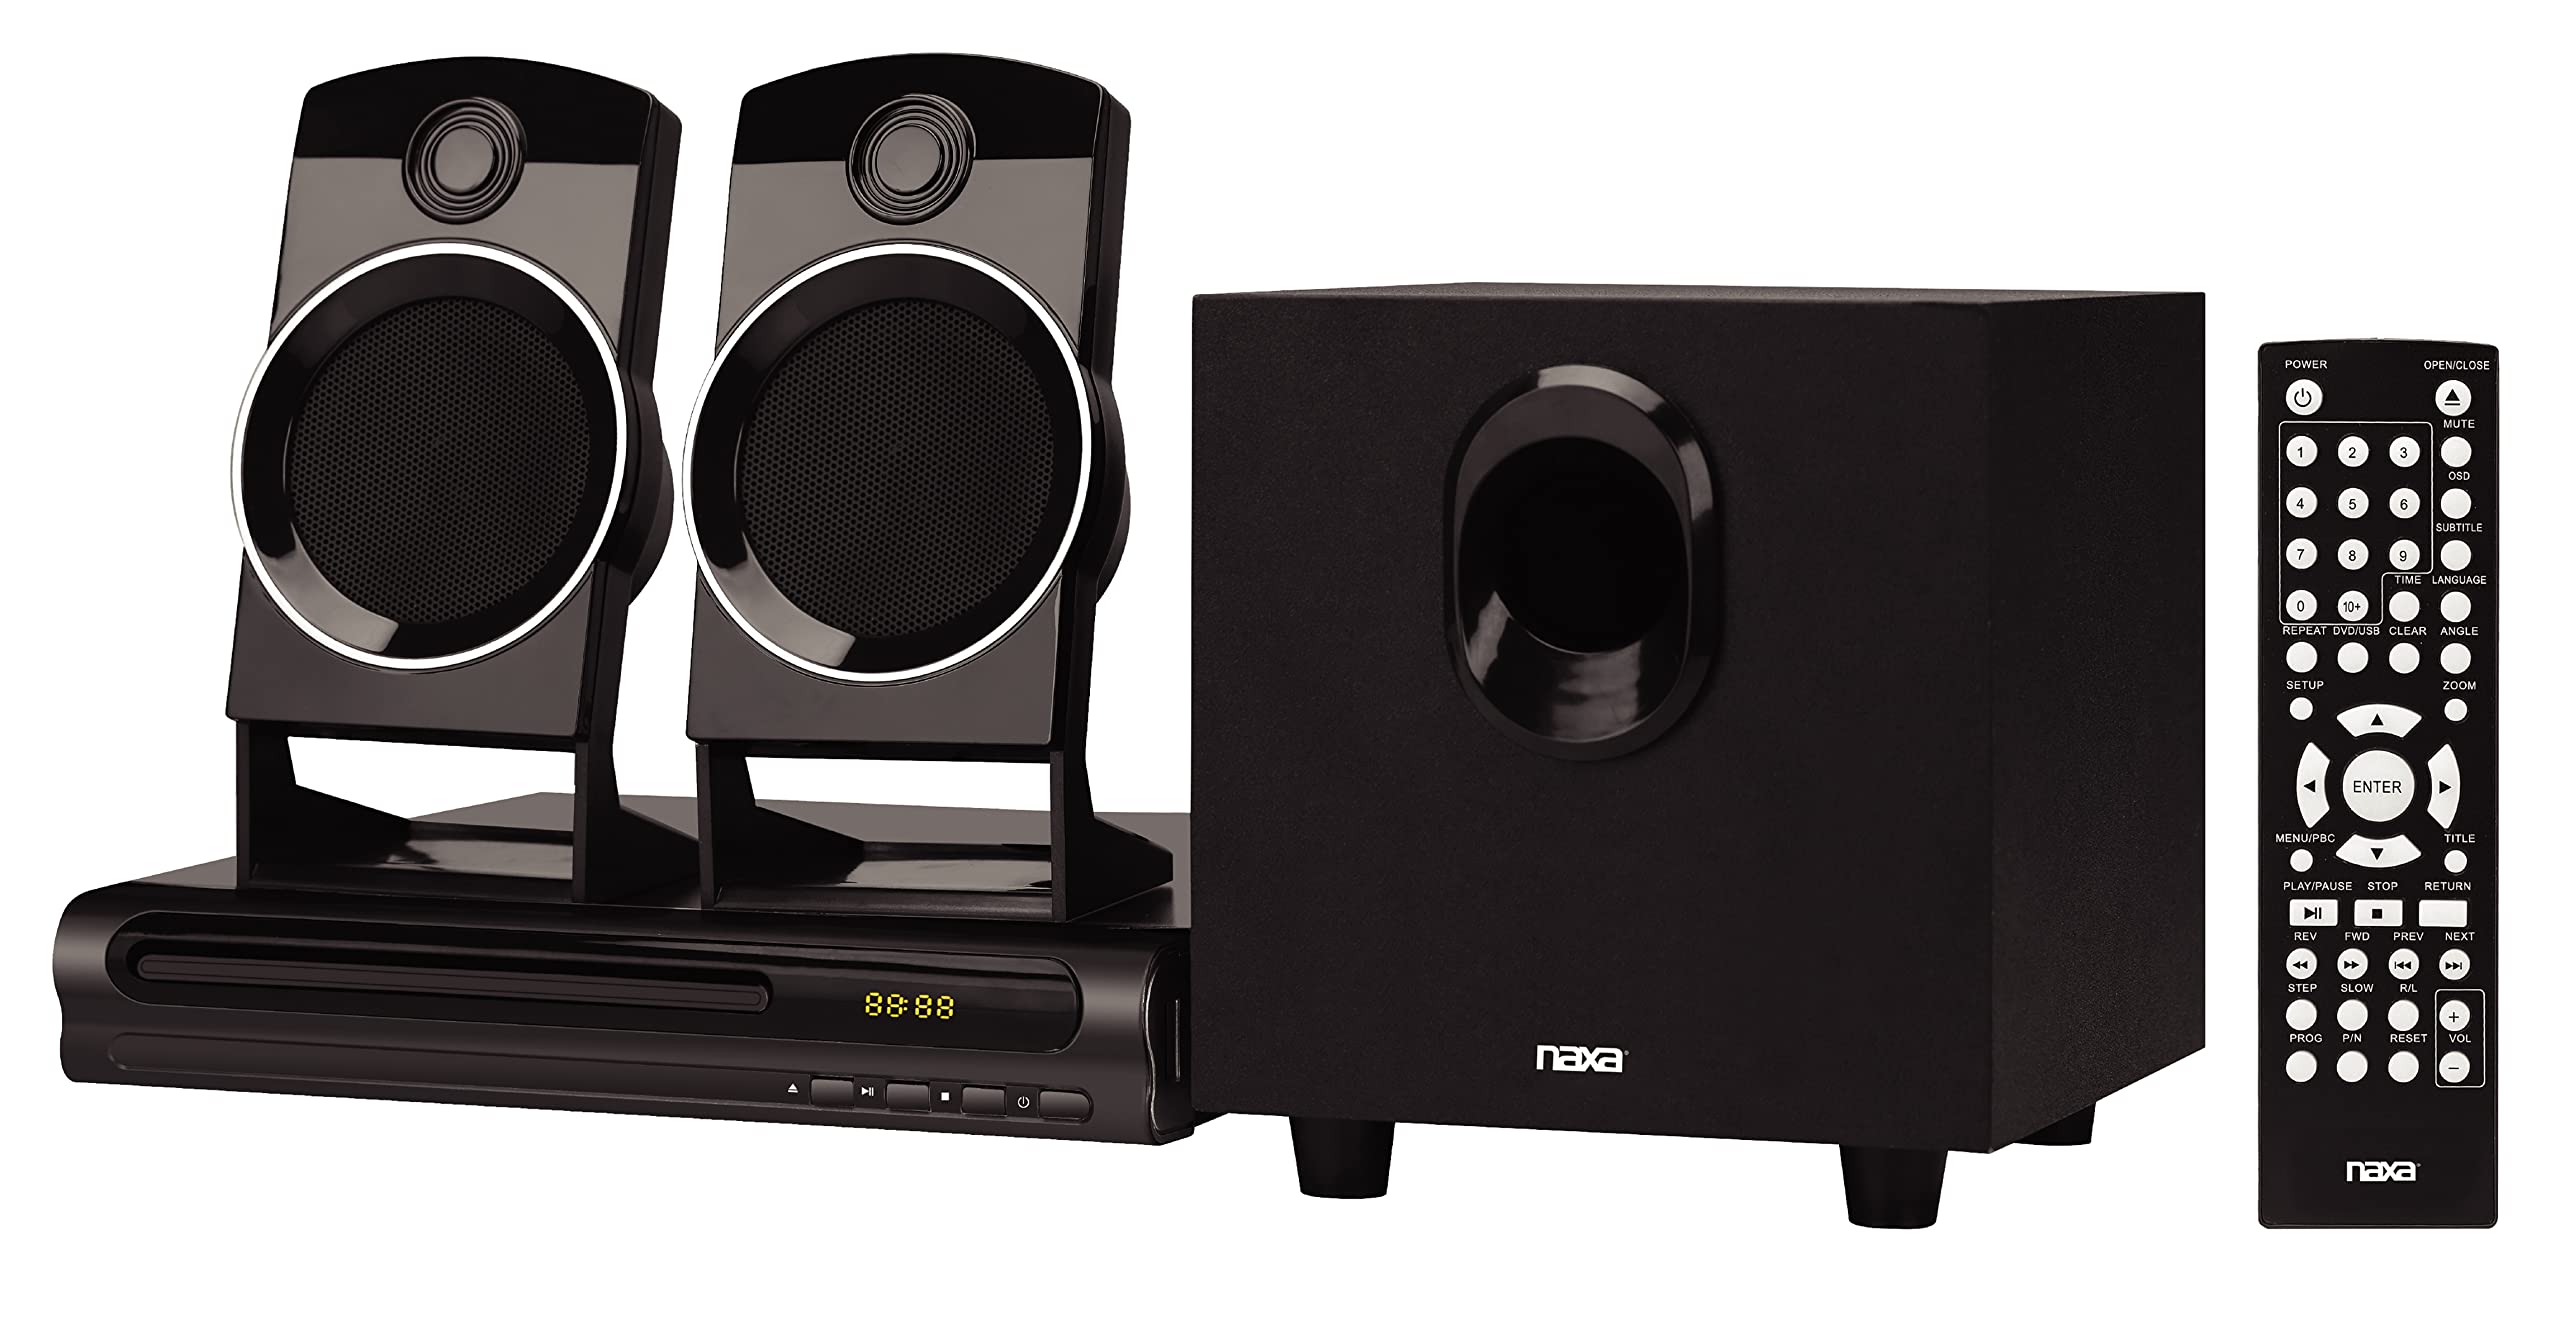 Naxa ND-863 2.1 Channel Home Theater DVD Player and Speaker Surround Sound System, Black